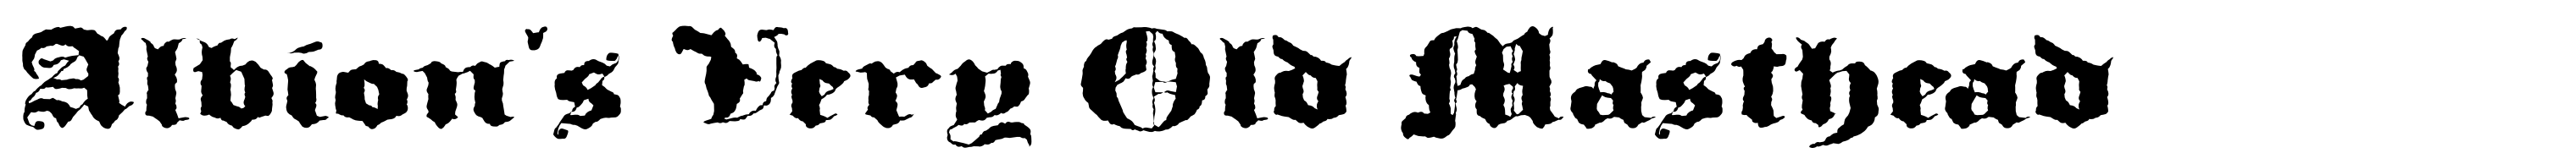 Albion's Very Old Masthead